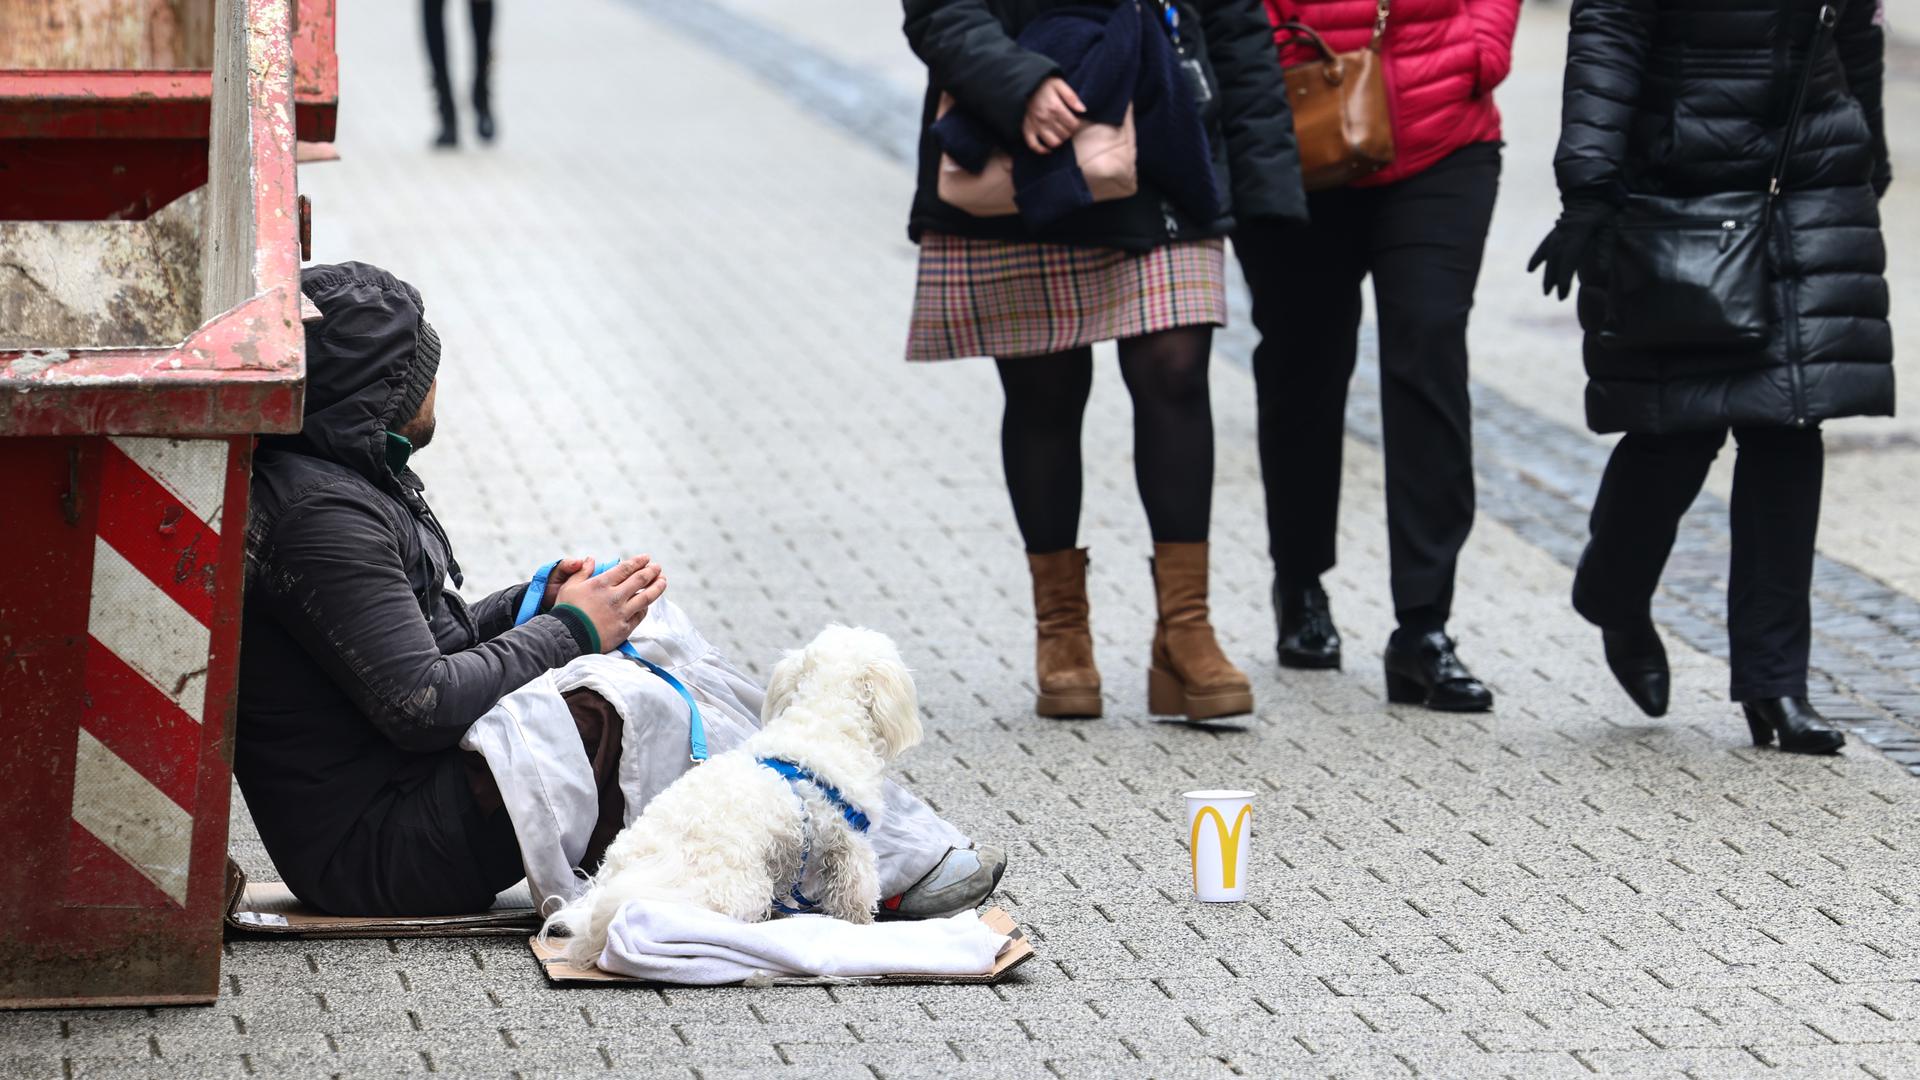 A beggar in a street in Luxembourg City